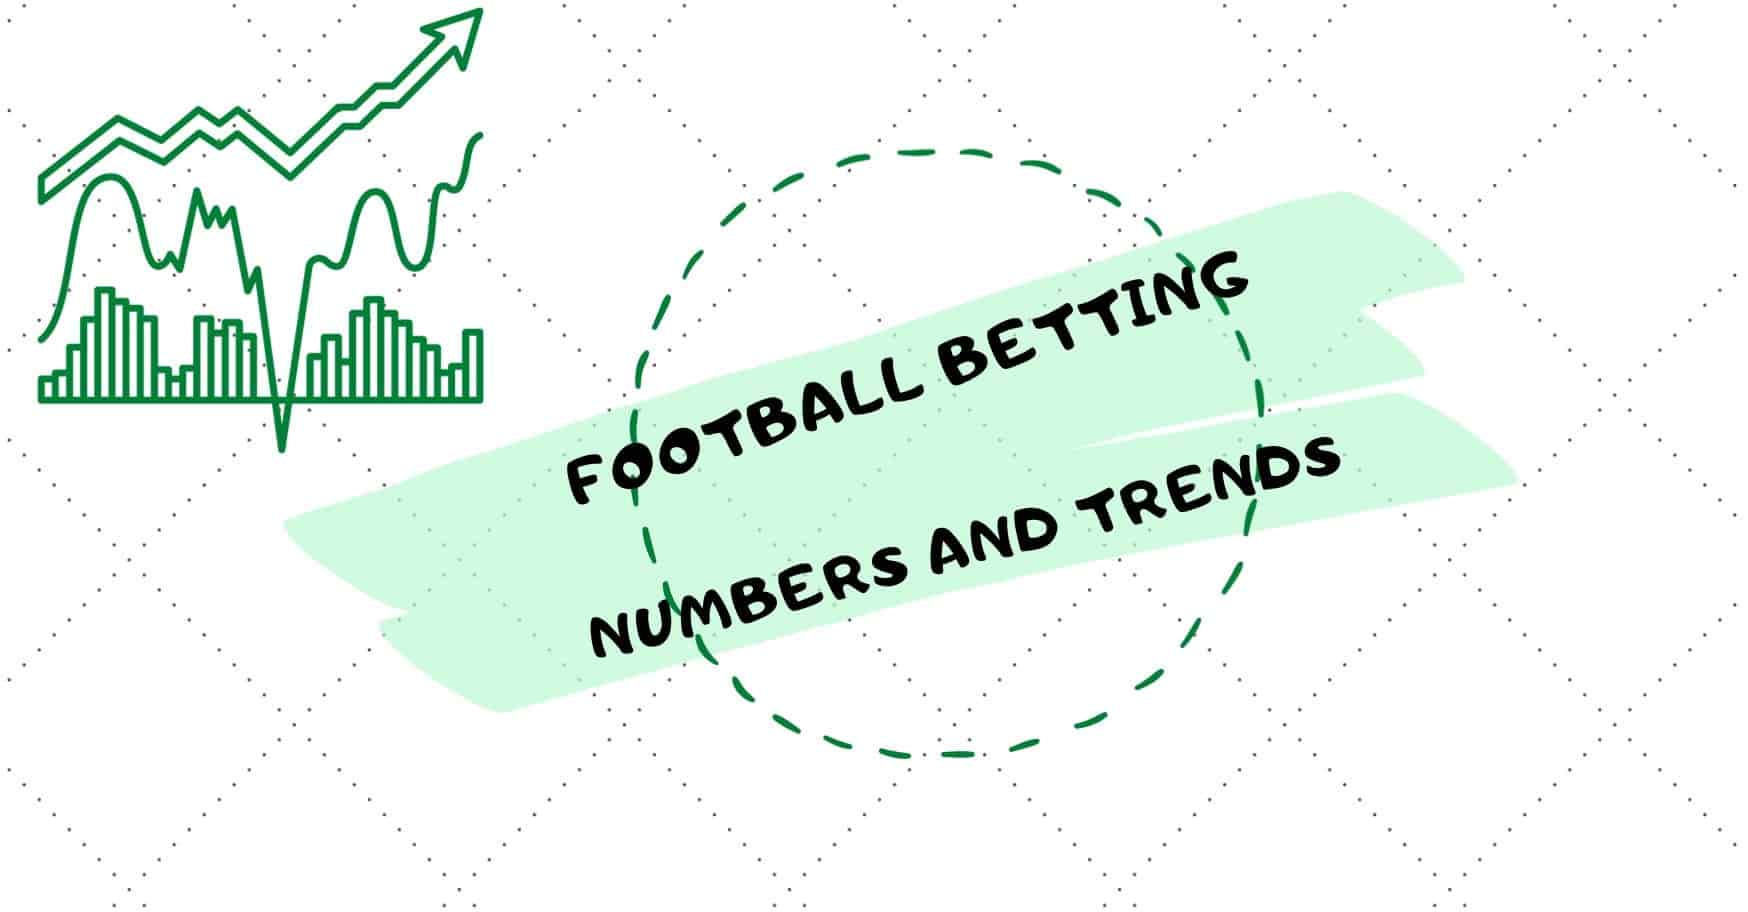 Football Betting in Canada: A Deep Dive into the Numbers and Trends